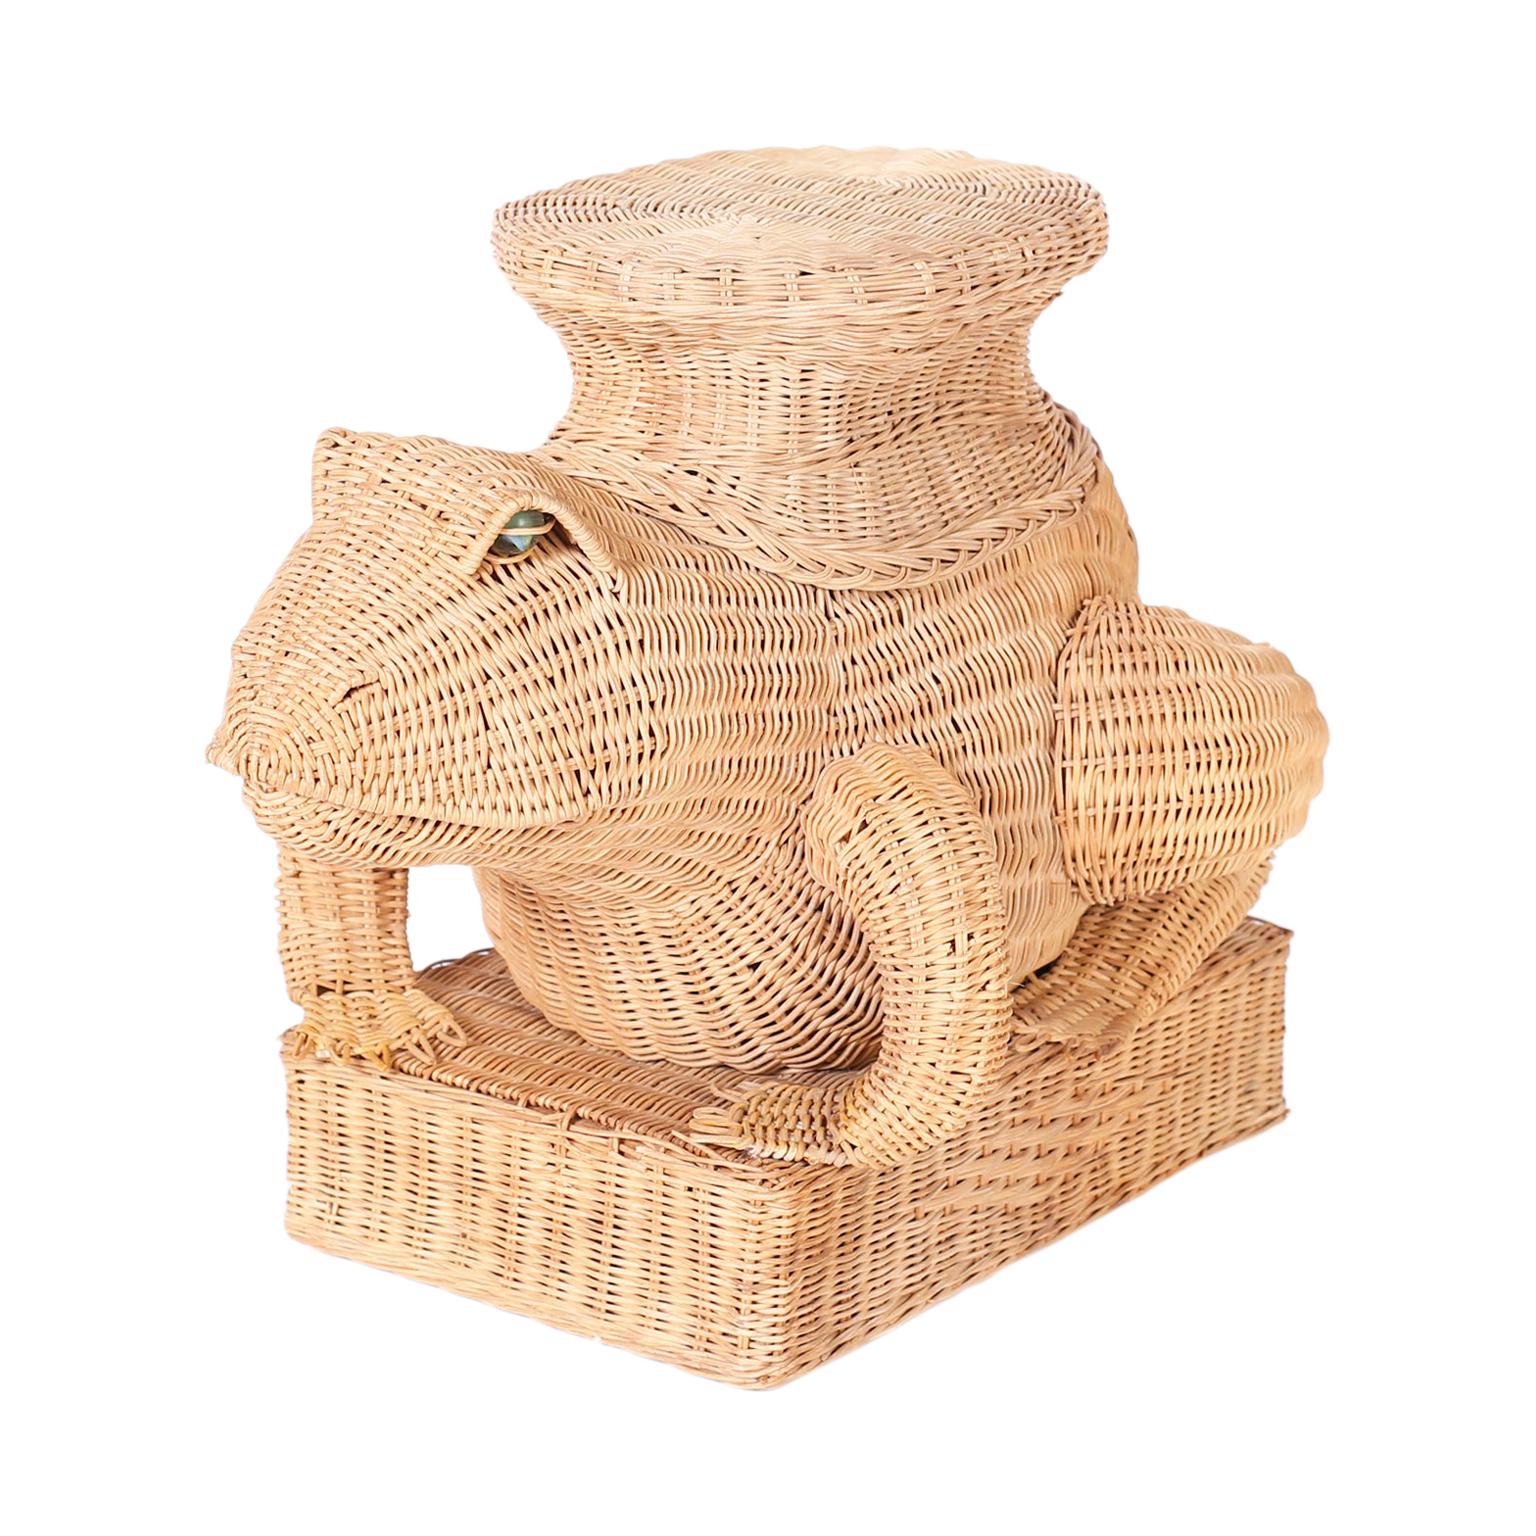 Midcentury Wicker Frog Stand or Seat